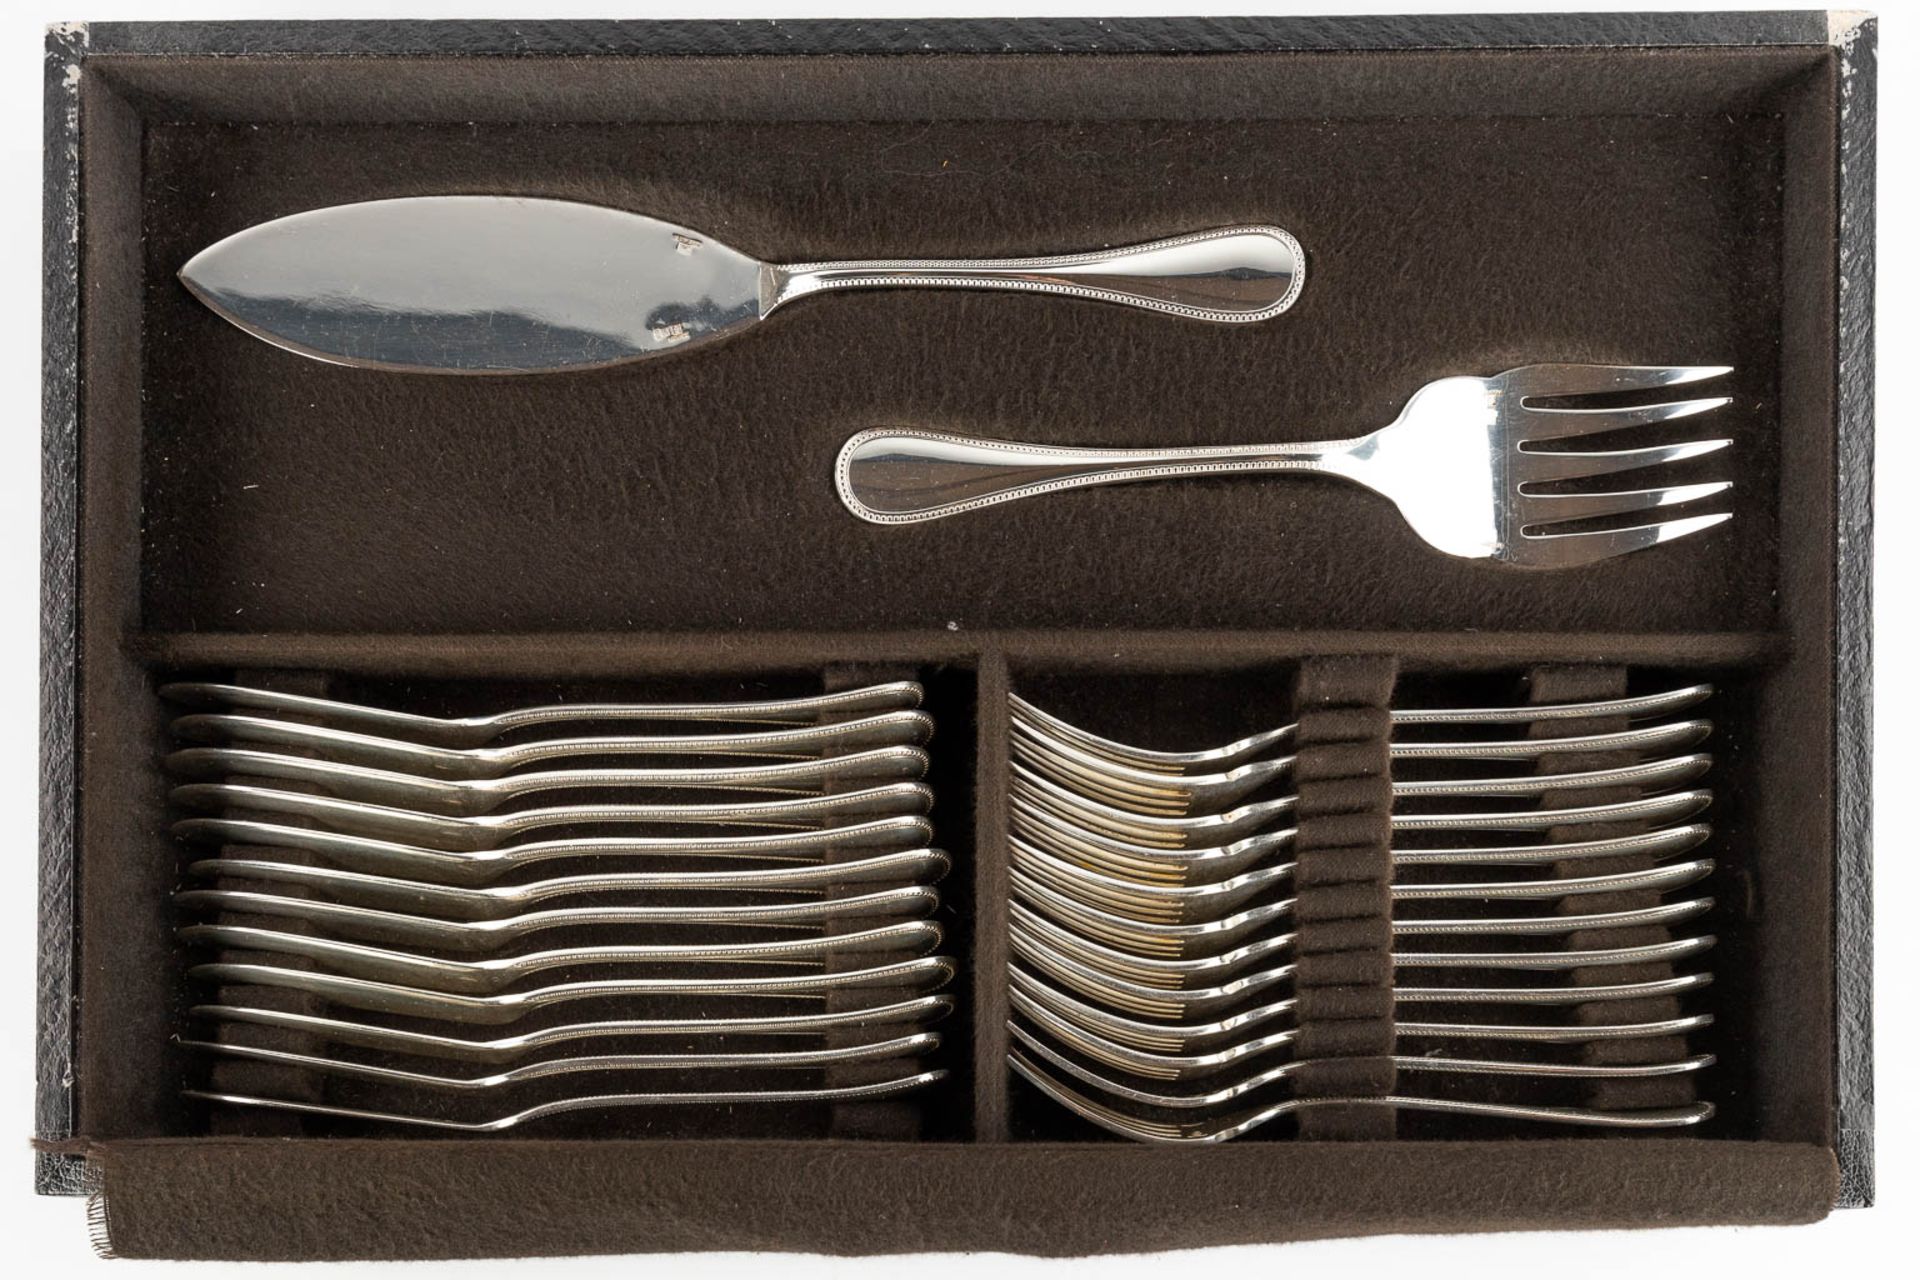 Christofle 'Perles' a large silver-plated cutlery in a storage box. 144 pieces. (D:29 x W:46 x H:33 - Image 19 of 21